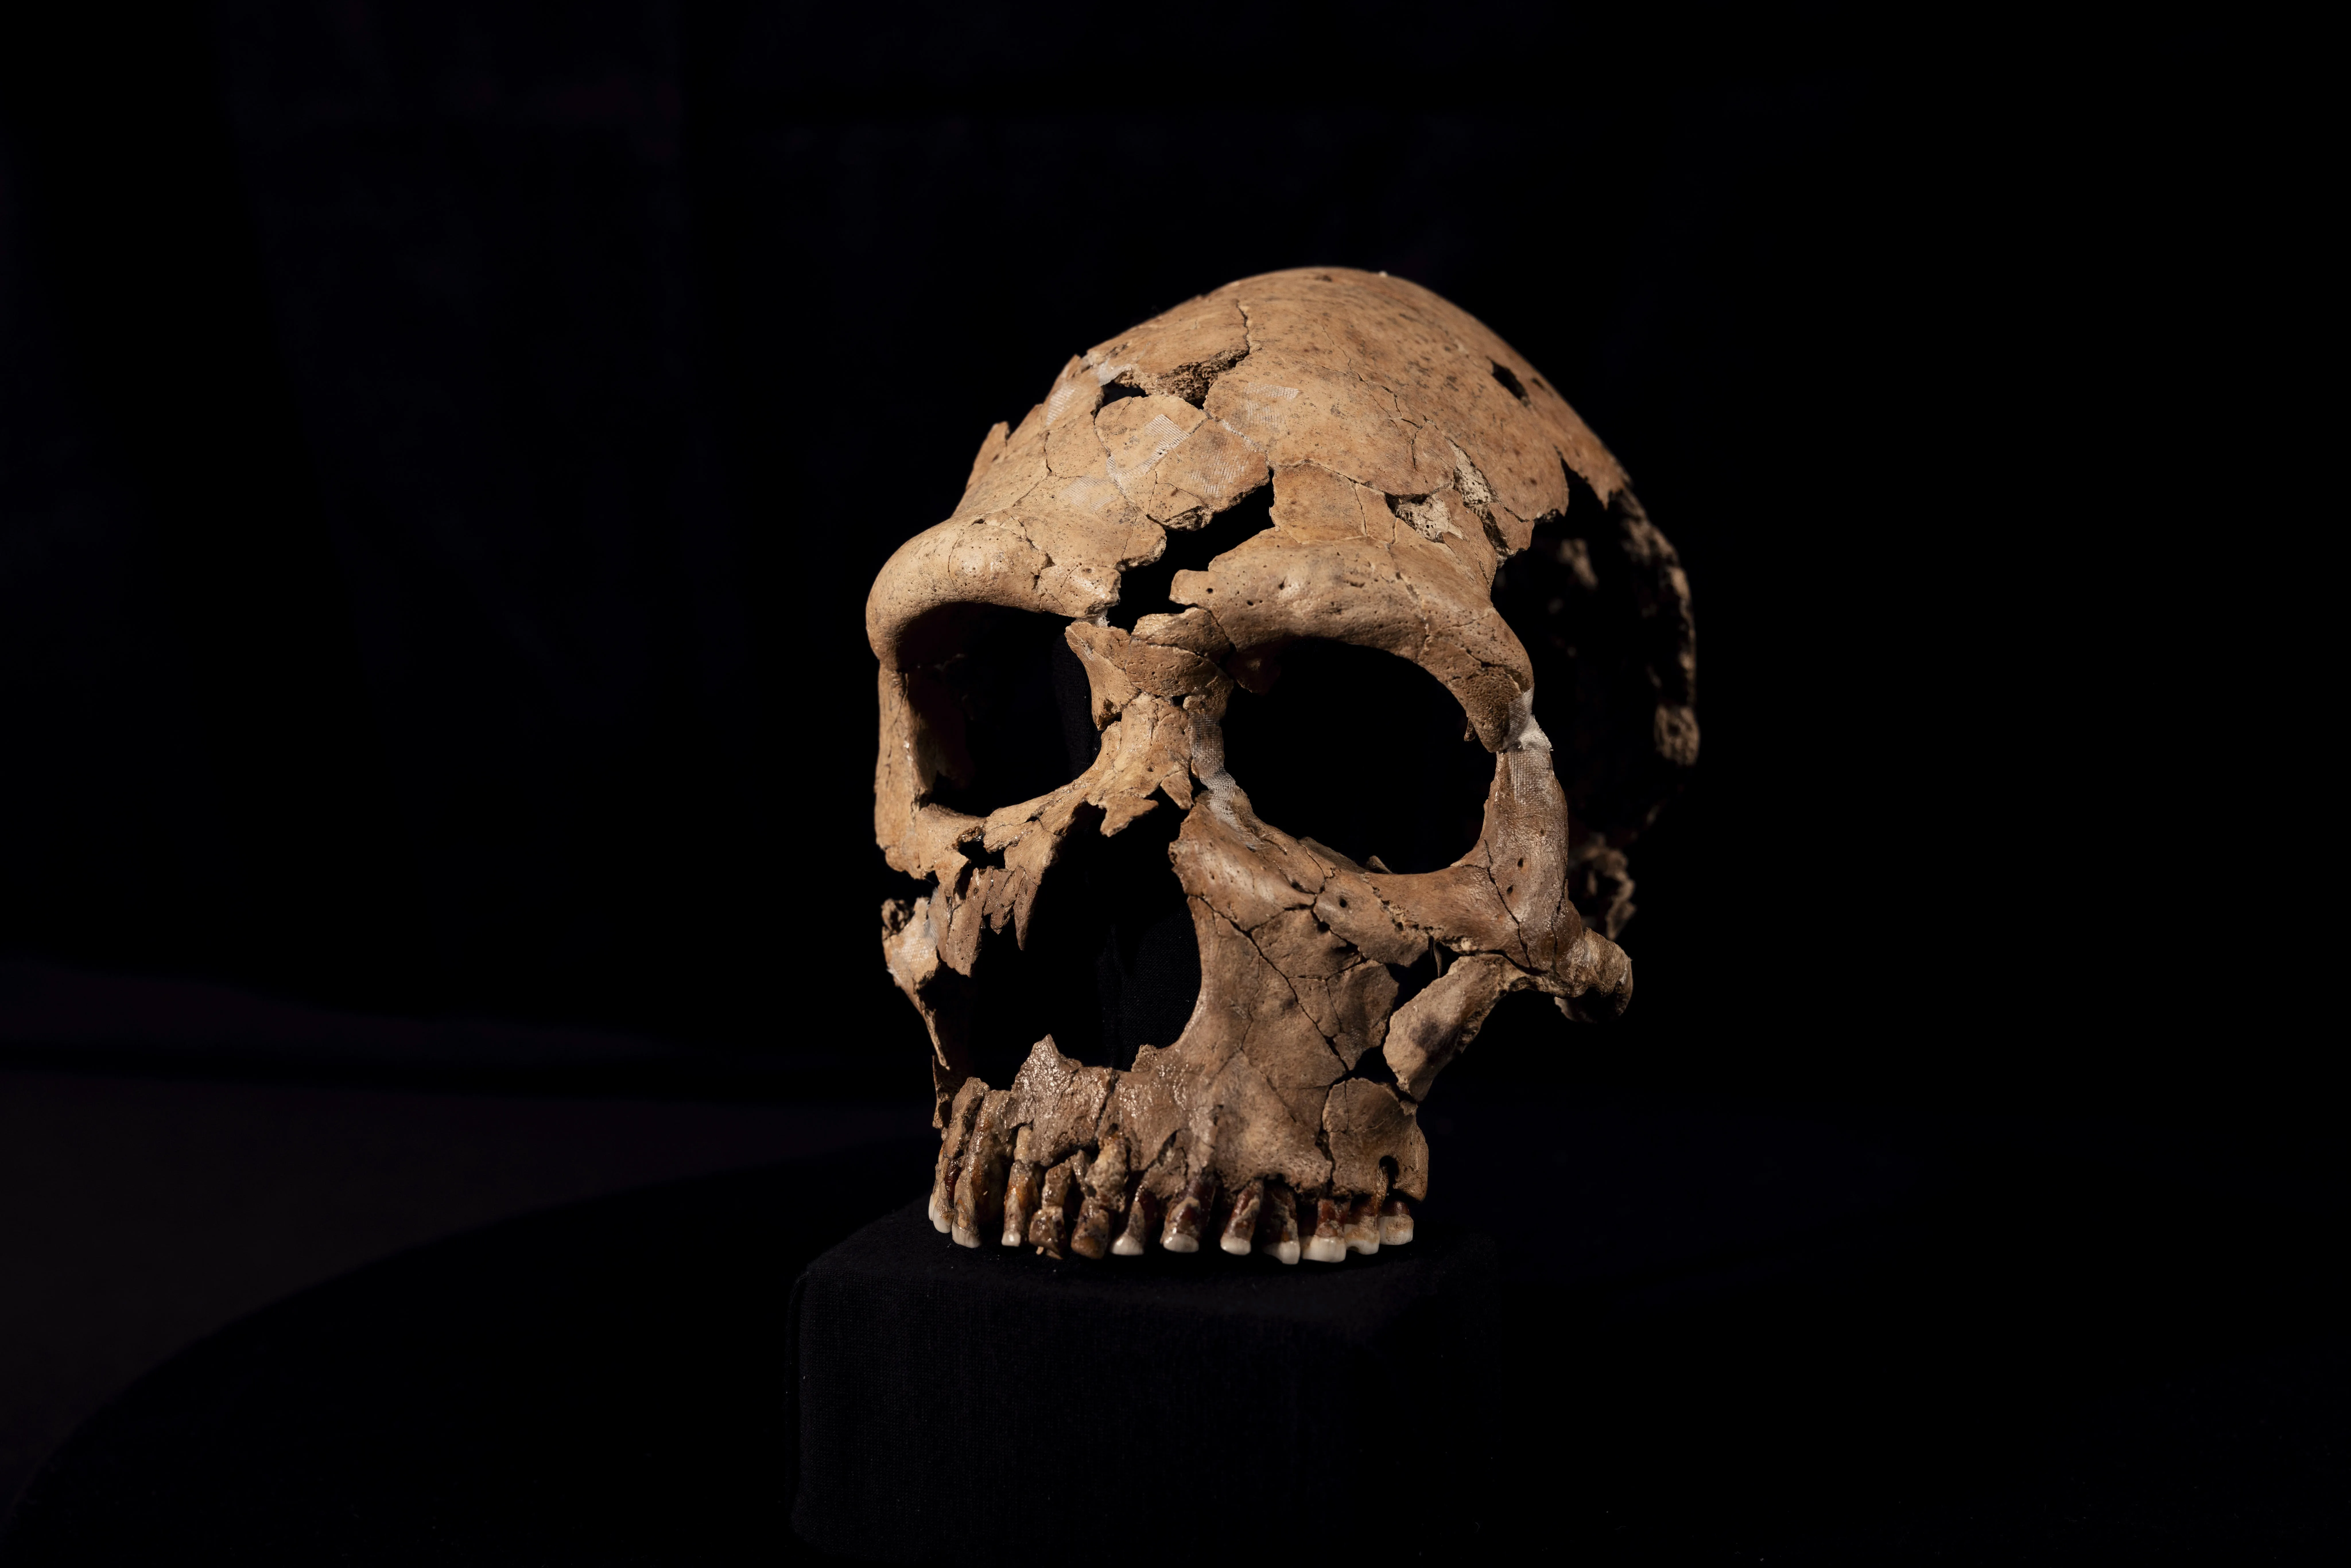 The skull of Shanidar Z, which has been reconstructed in the lab at the University of Cambridge. Credit: BBC Studios/Jamie Simonds